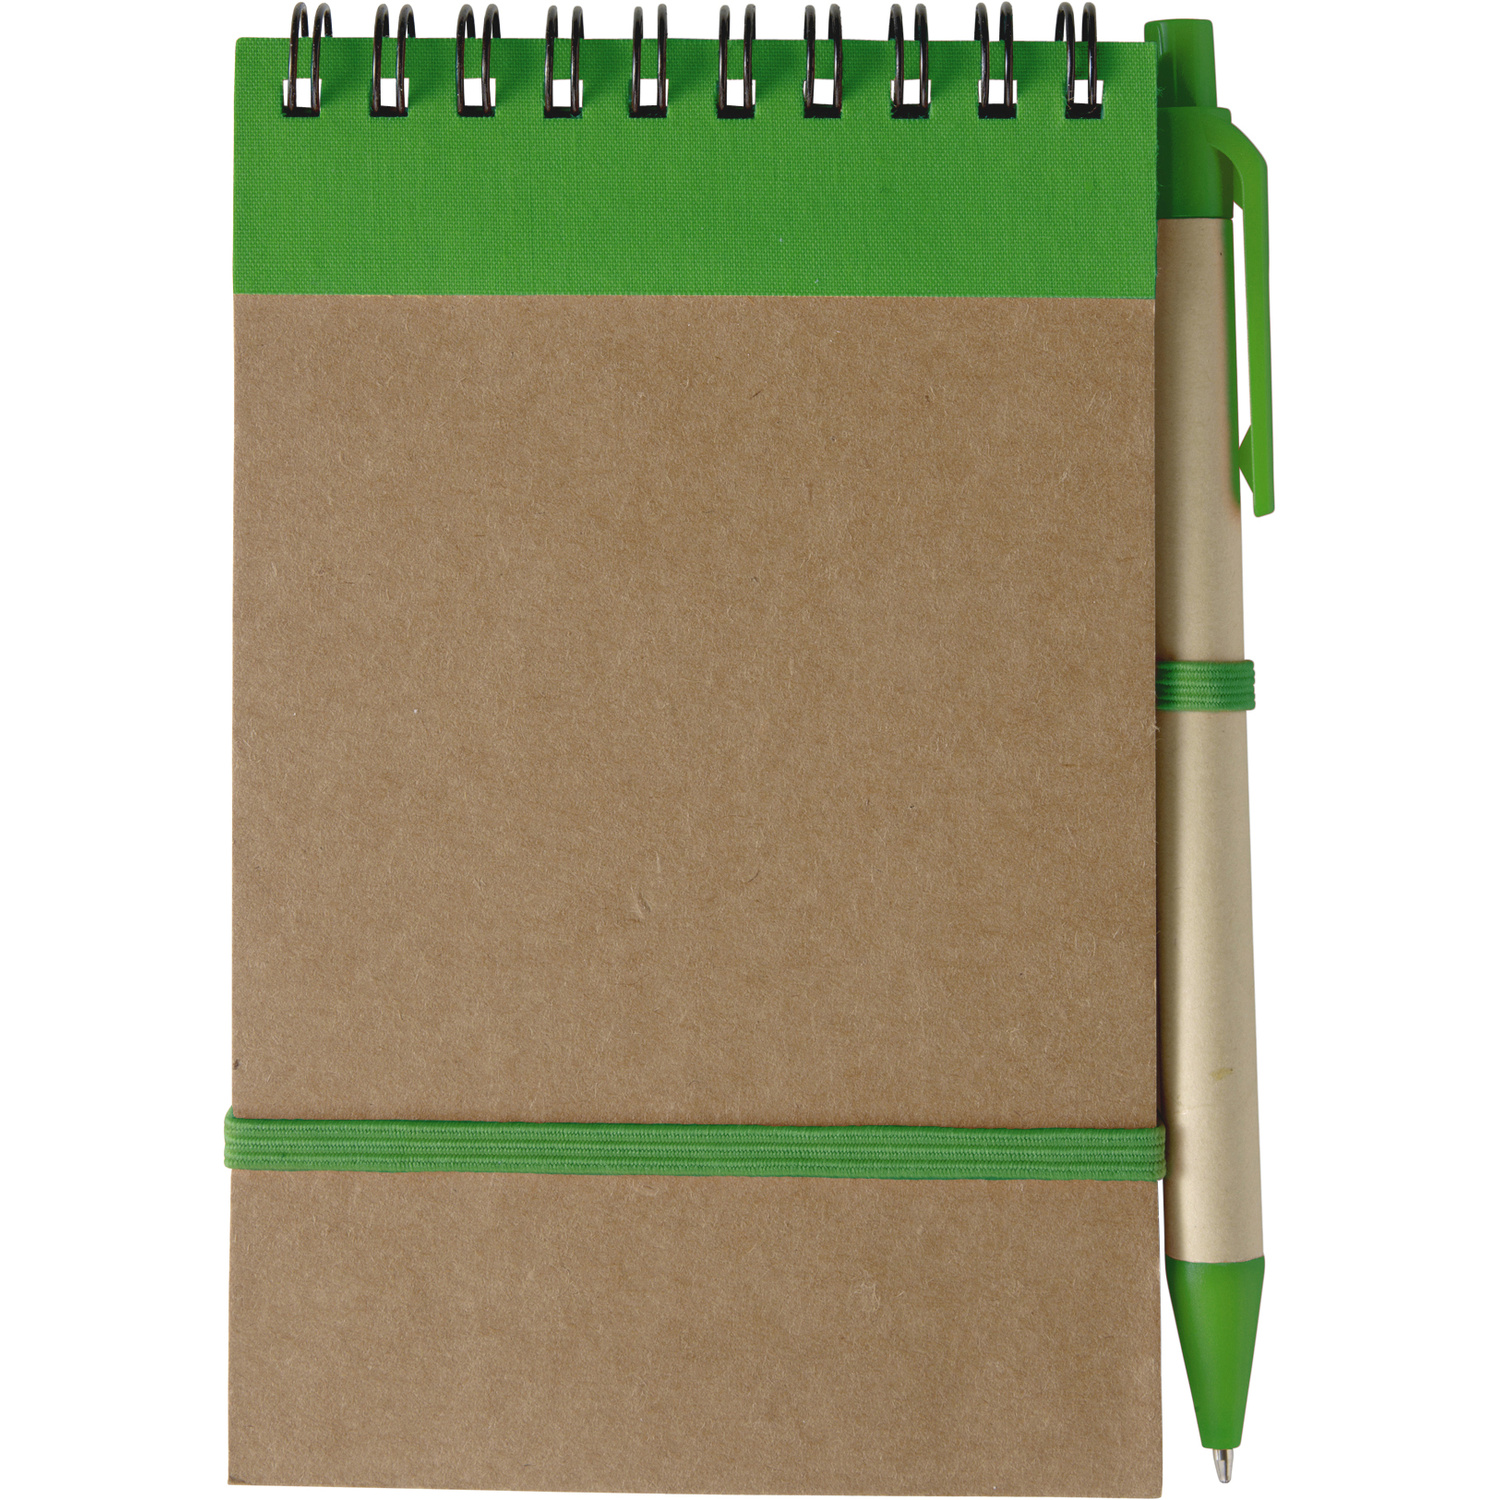 005410 004999999 2d090 frt pro01 fal - Recycled Cardboard notebook with ballpen